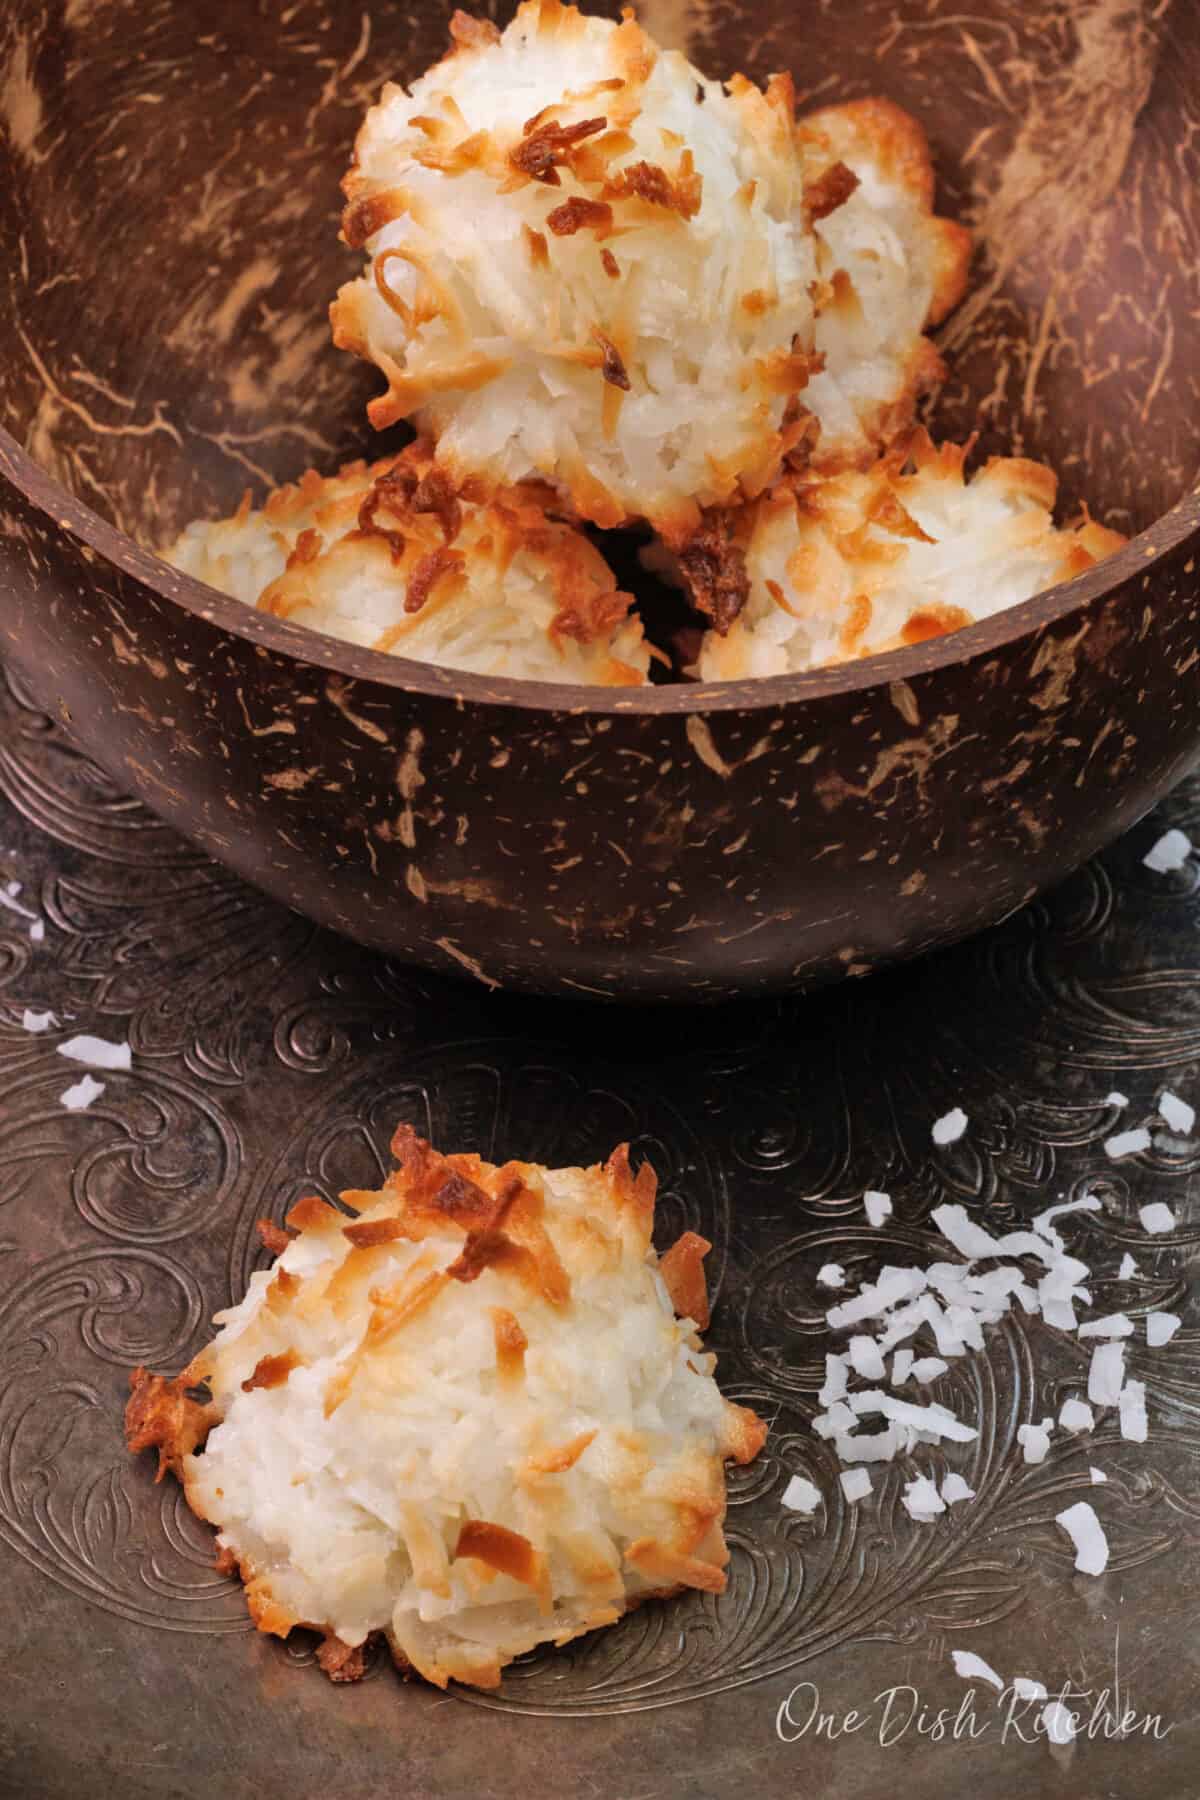 coconut macaroons on a silver try next to coconut flakes scattered around the cookie.